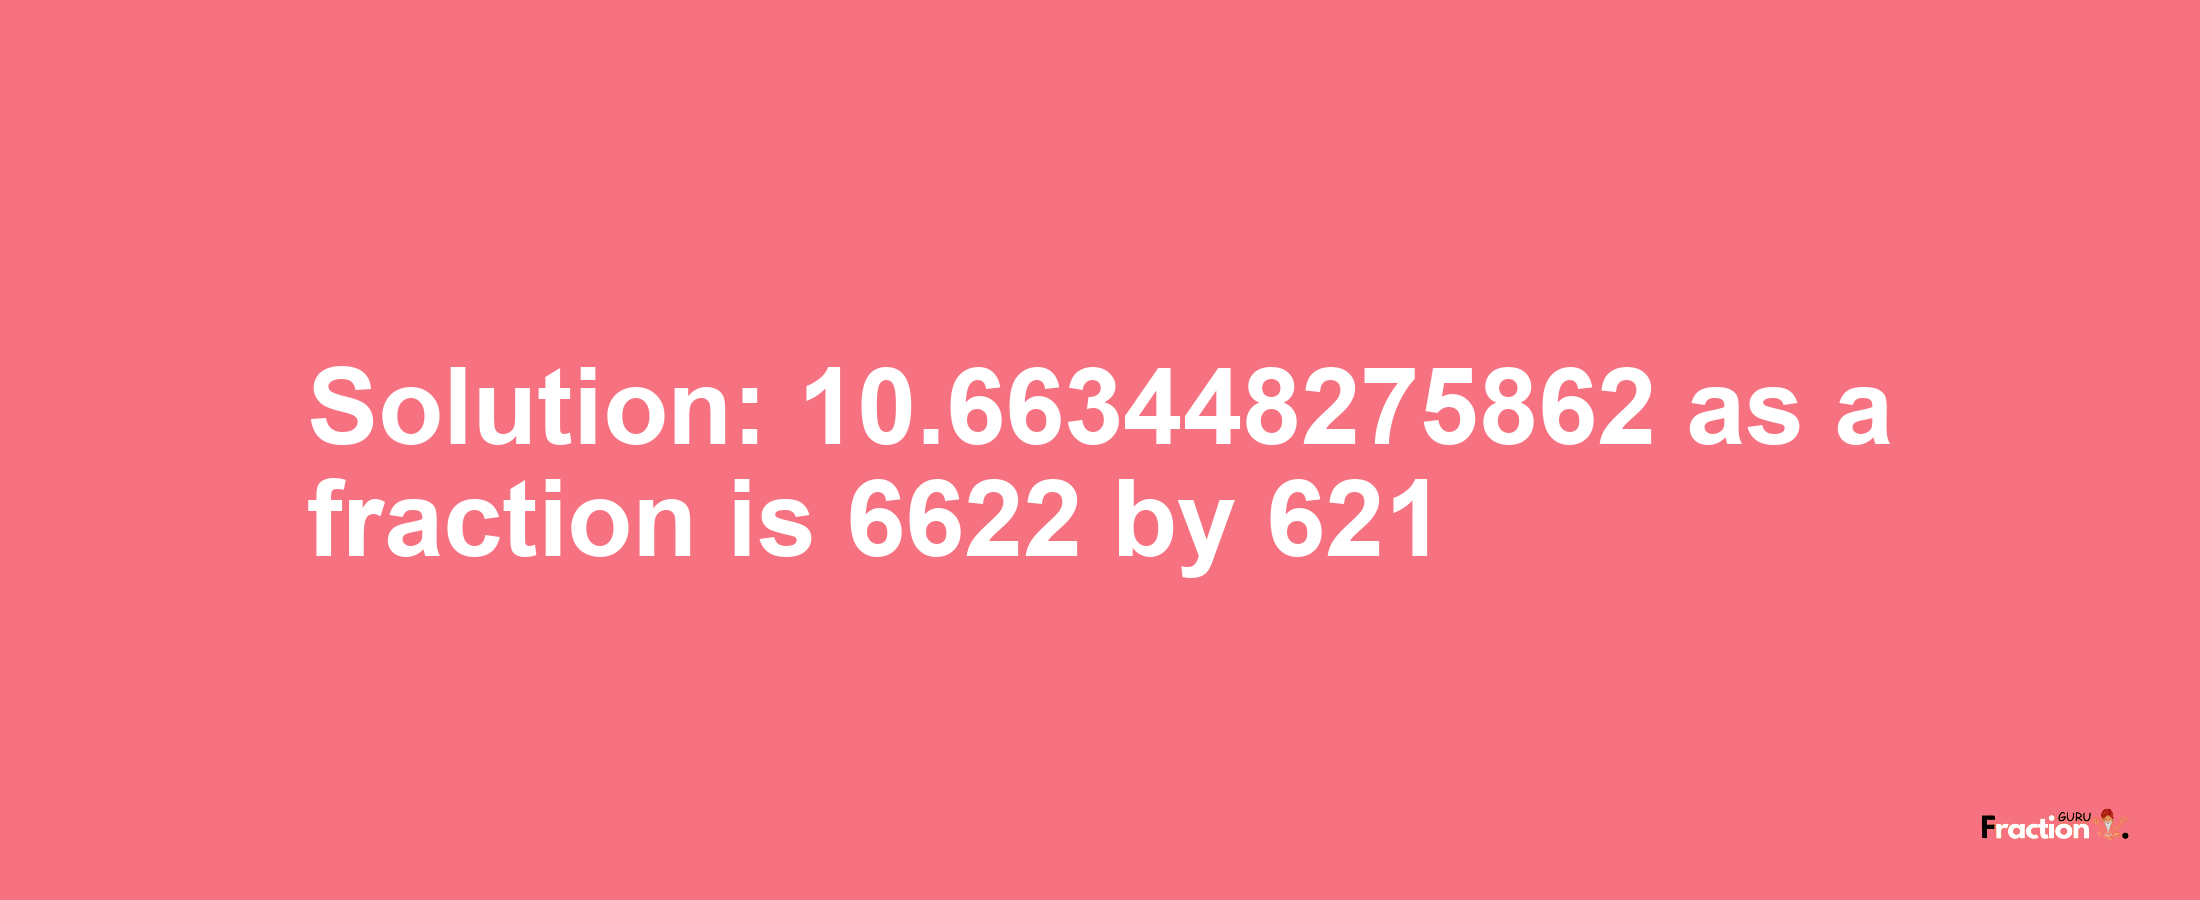 Solution:10.663448275862 as a fraction is 6622/621